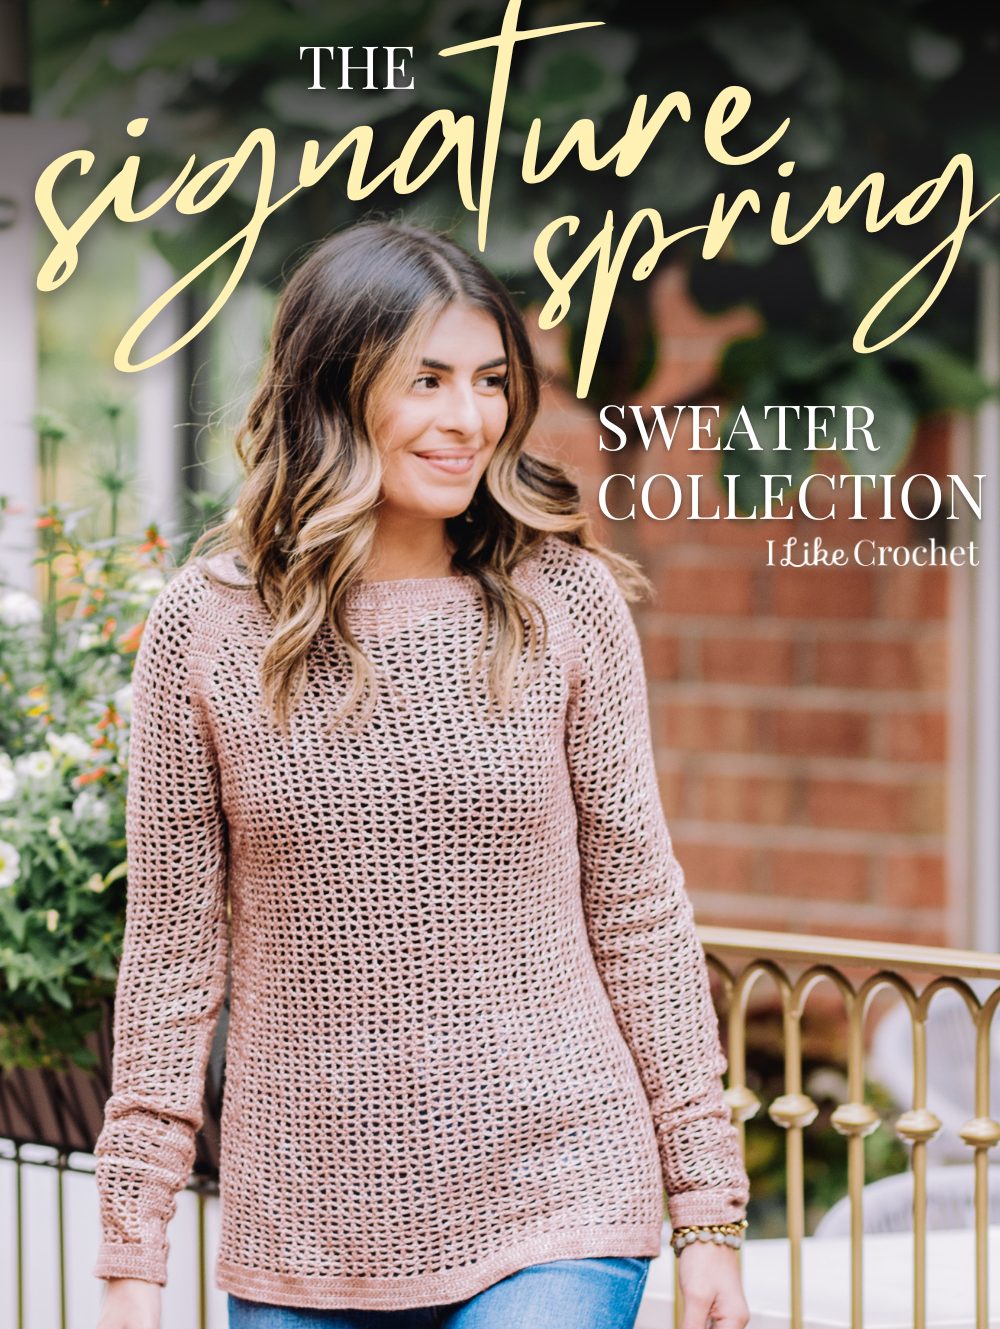 Crocheting a Sweater: A Comprehensive Step-by-Step Guide - Freebie Patterns